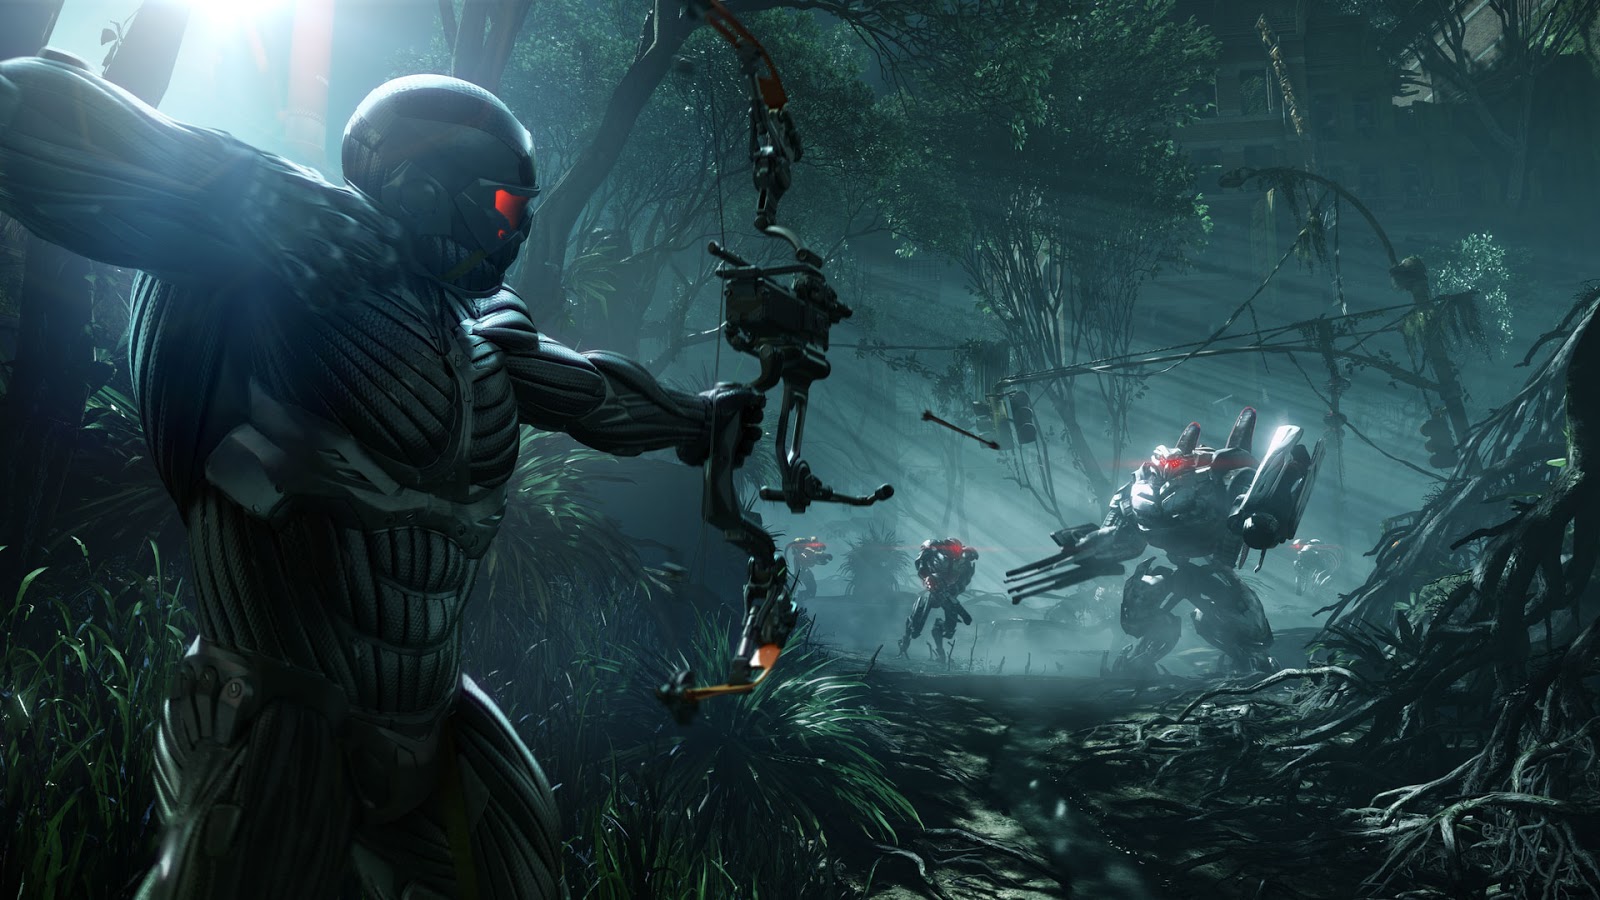 crysis 3 free download for pc highly compressed